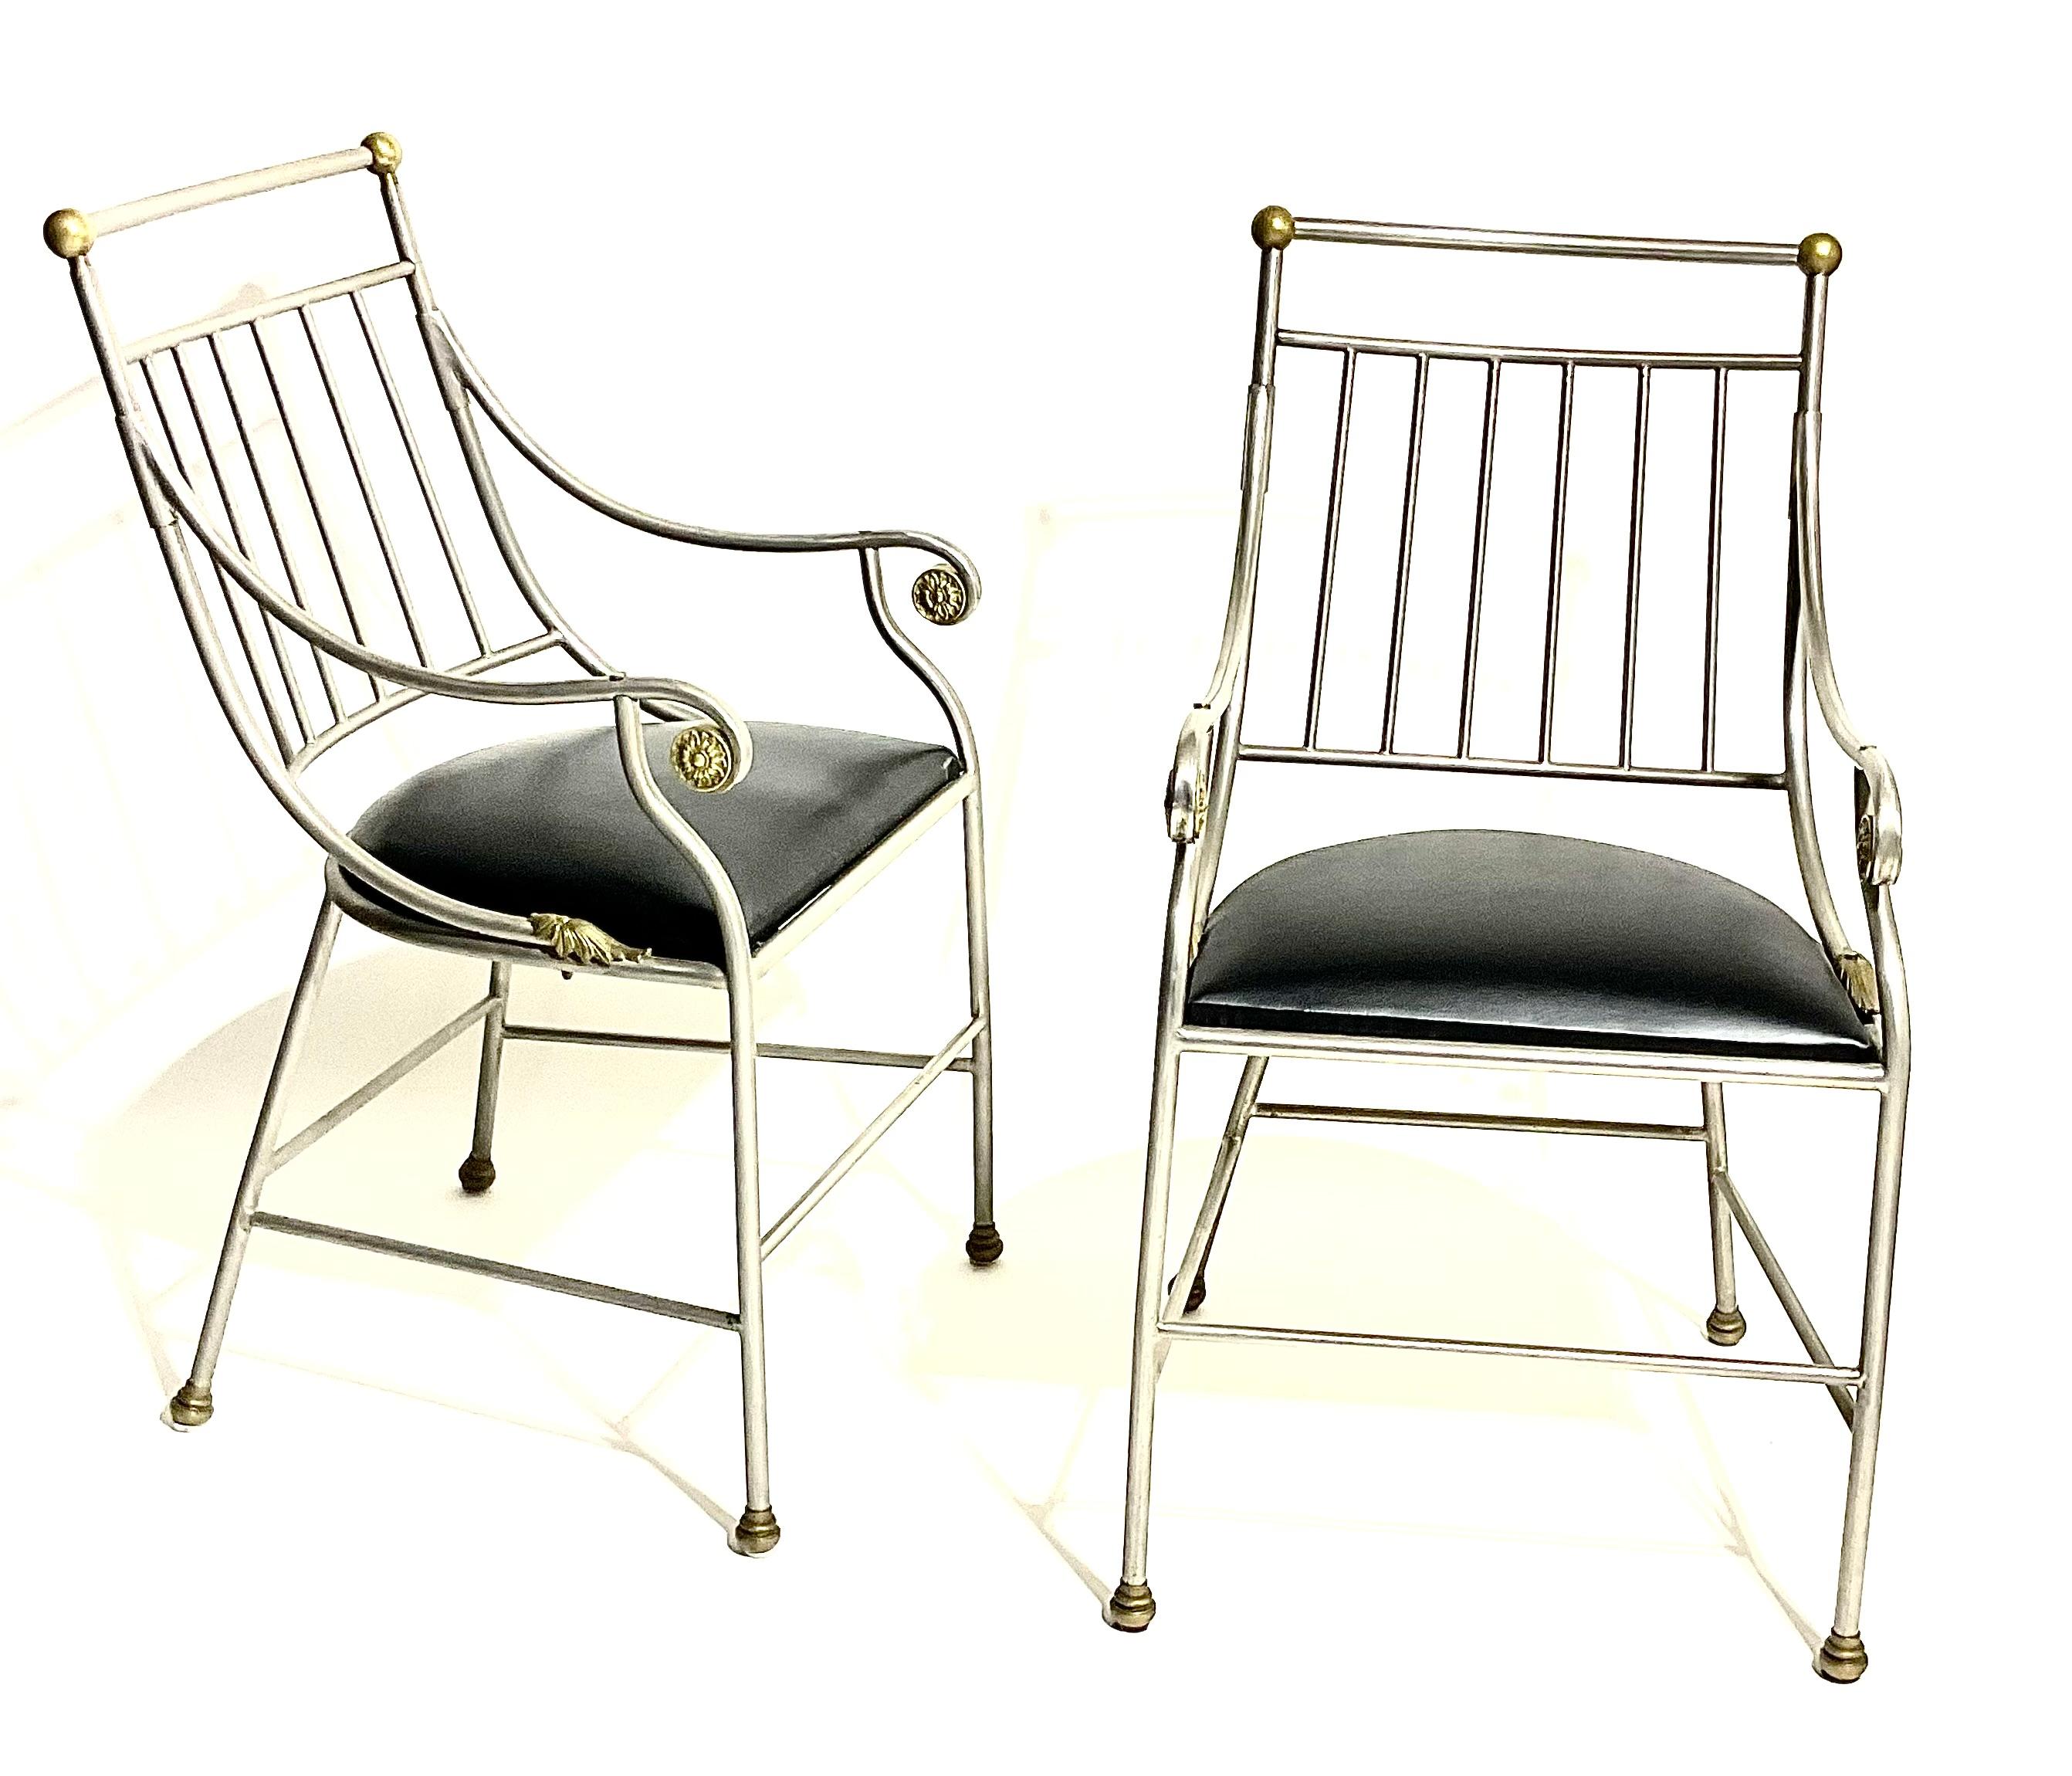 French Antique Art Deco Pair of Steel chairs with gilt decoration highlights  For Sale 2